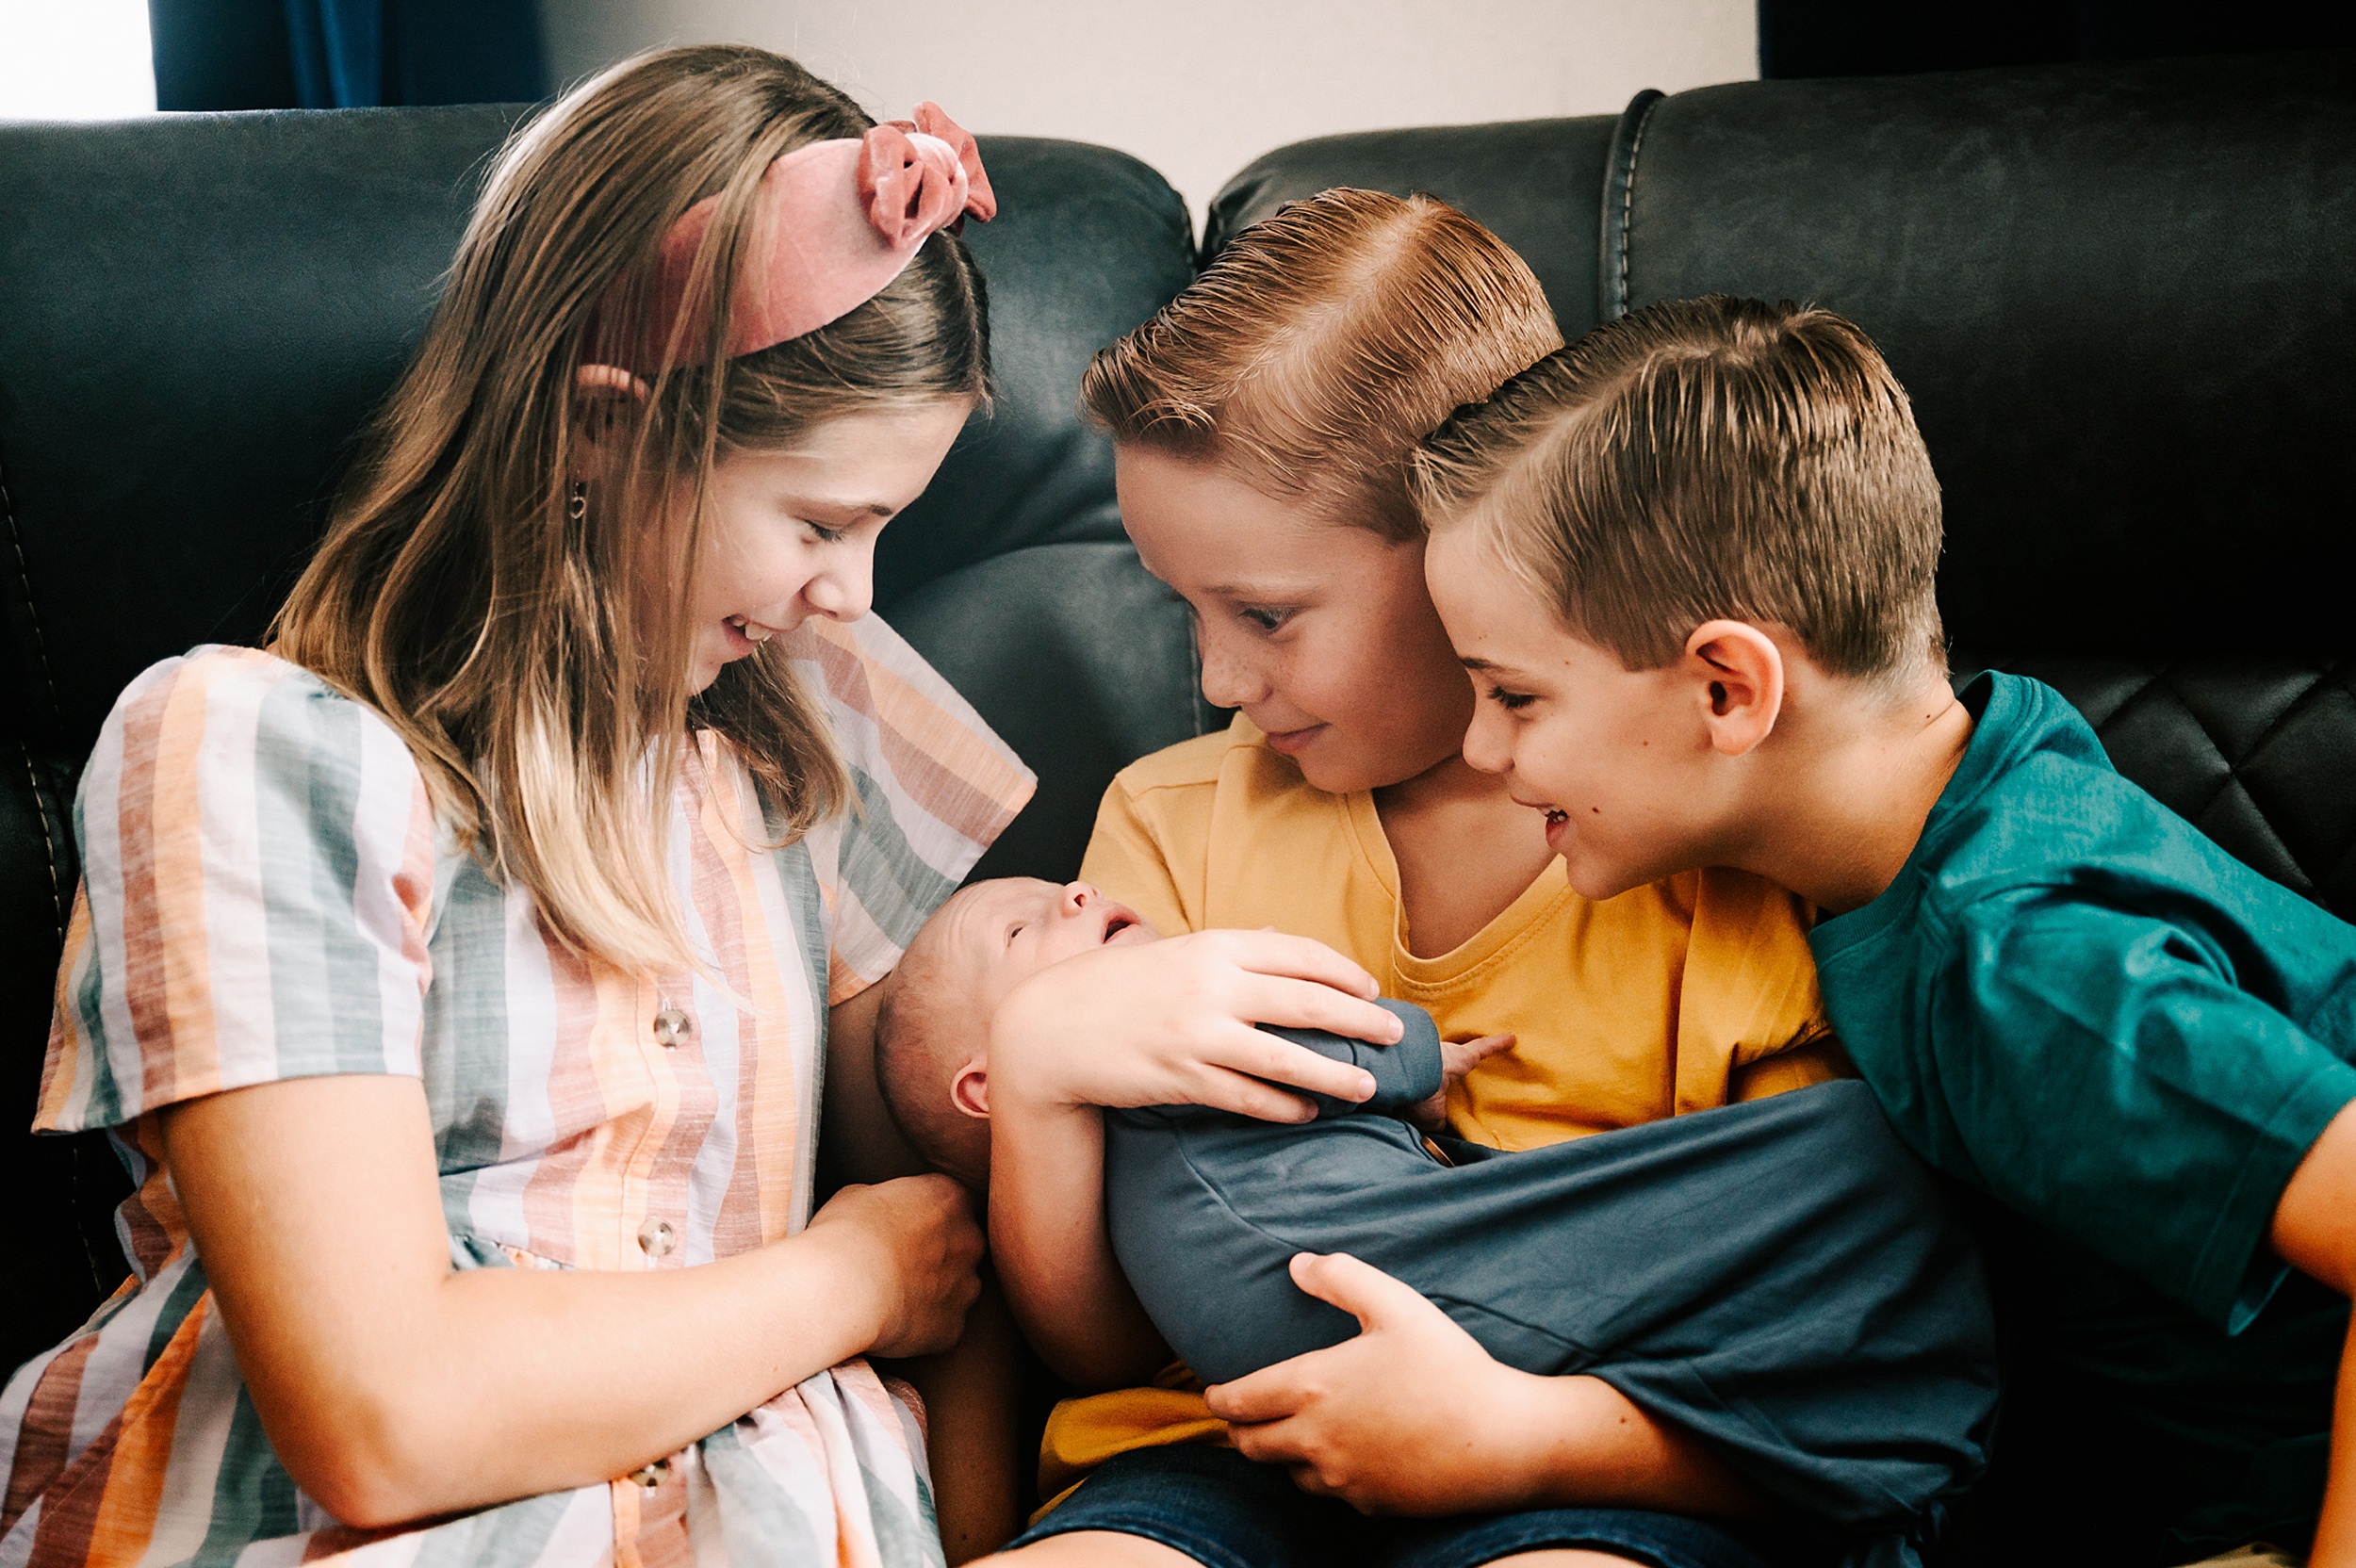 A young boy in a yellow shirt holds his newborn baby sibling while his brother and sister lean in brookhaven country day school